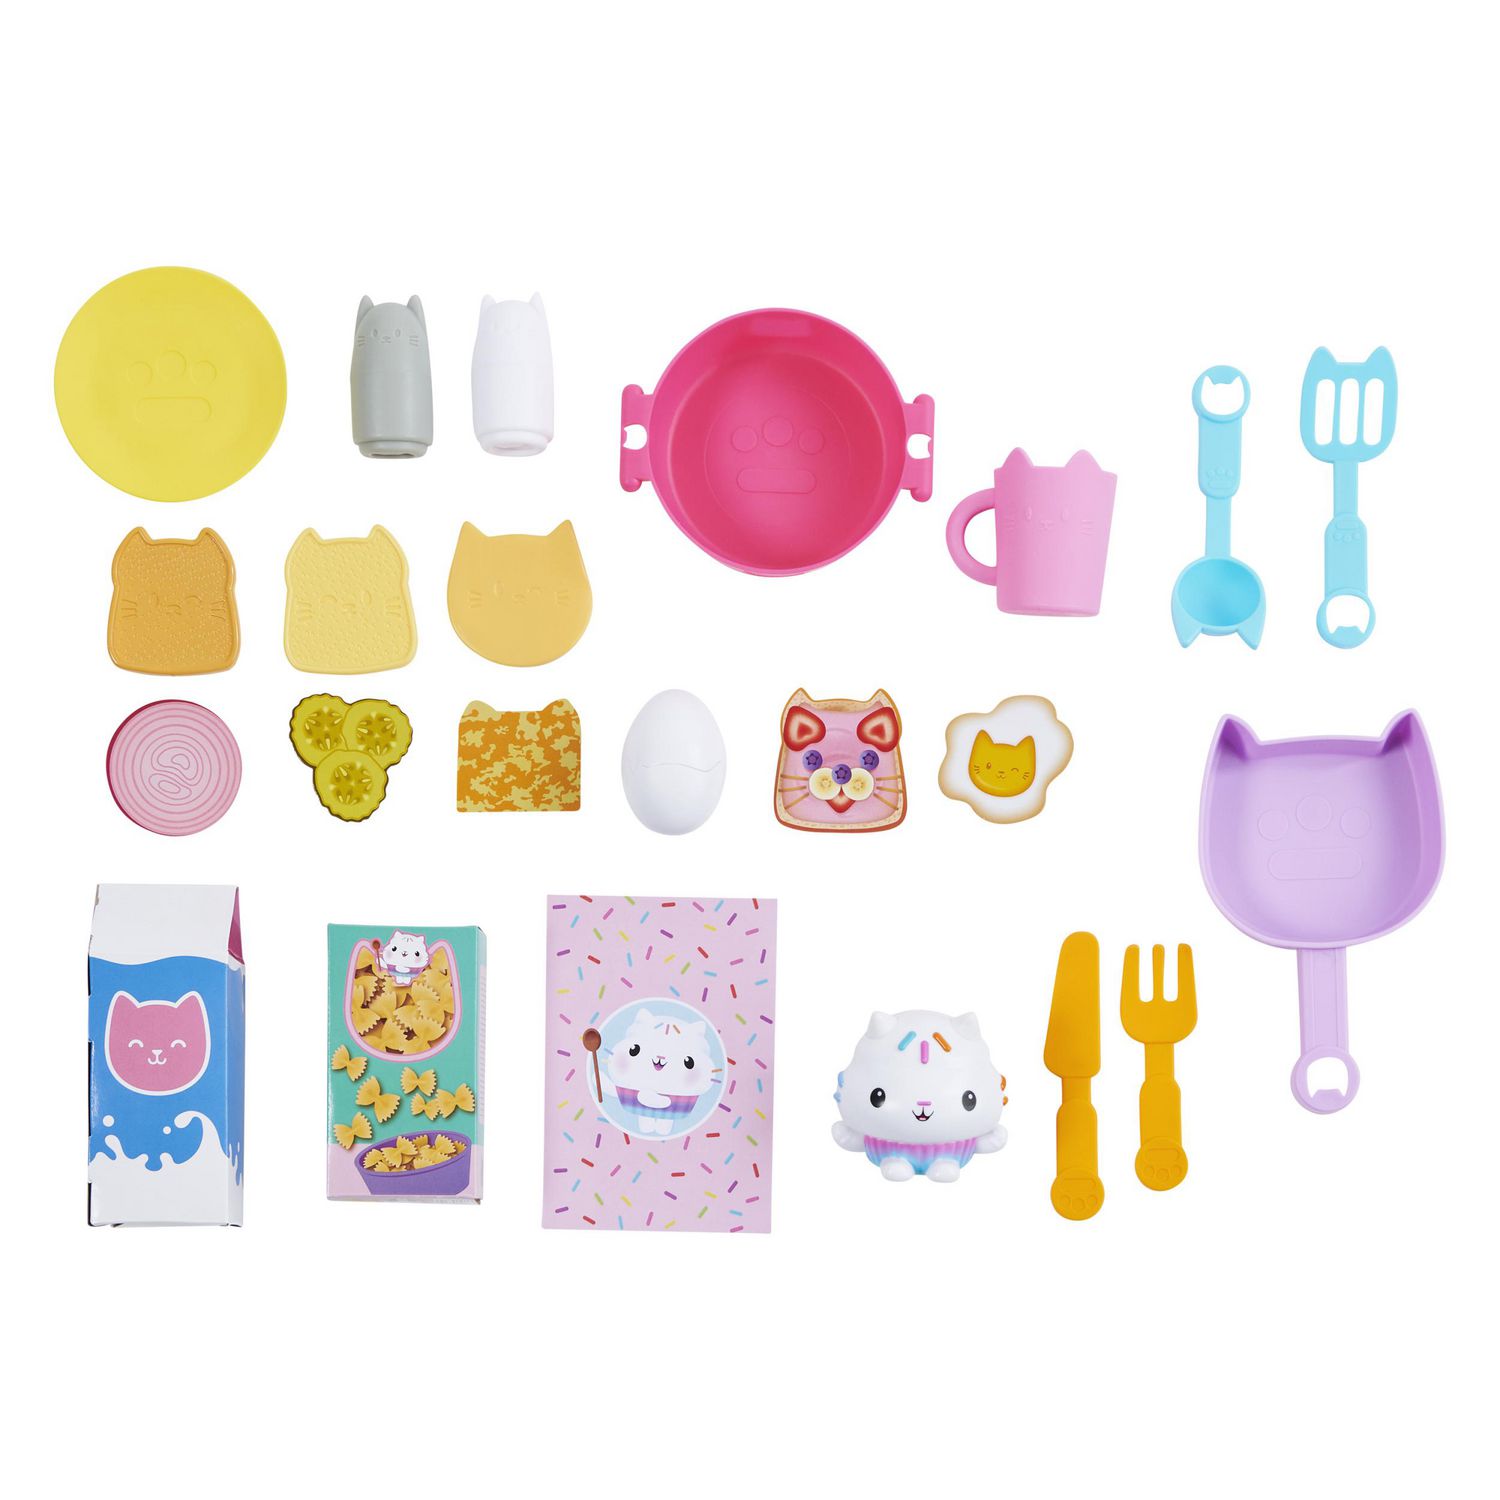 Gabby's Dollhouse, Cakey Kitchen Set for Kids with Play Kitchen